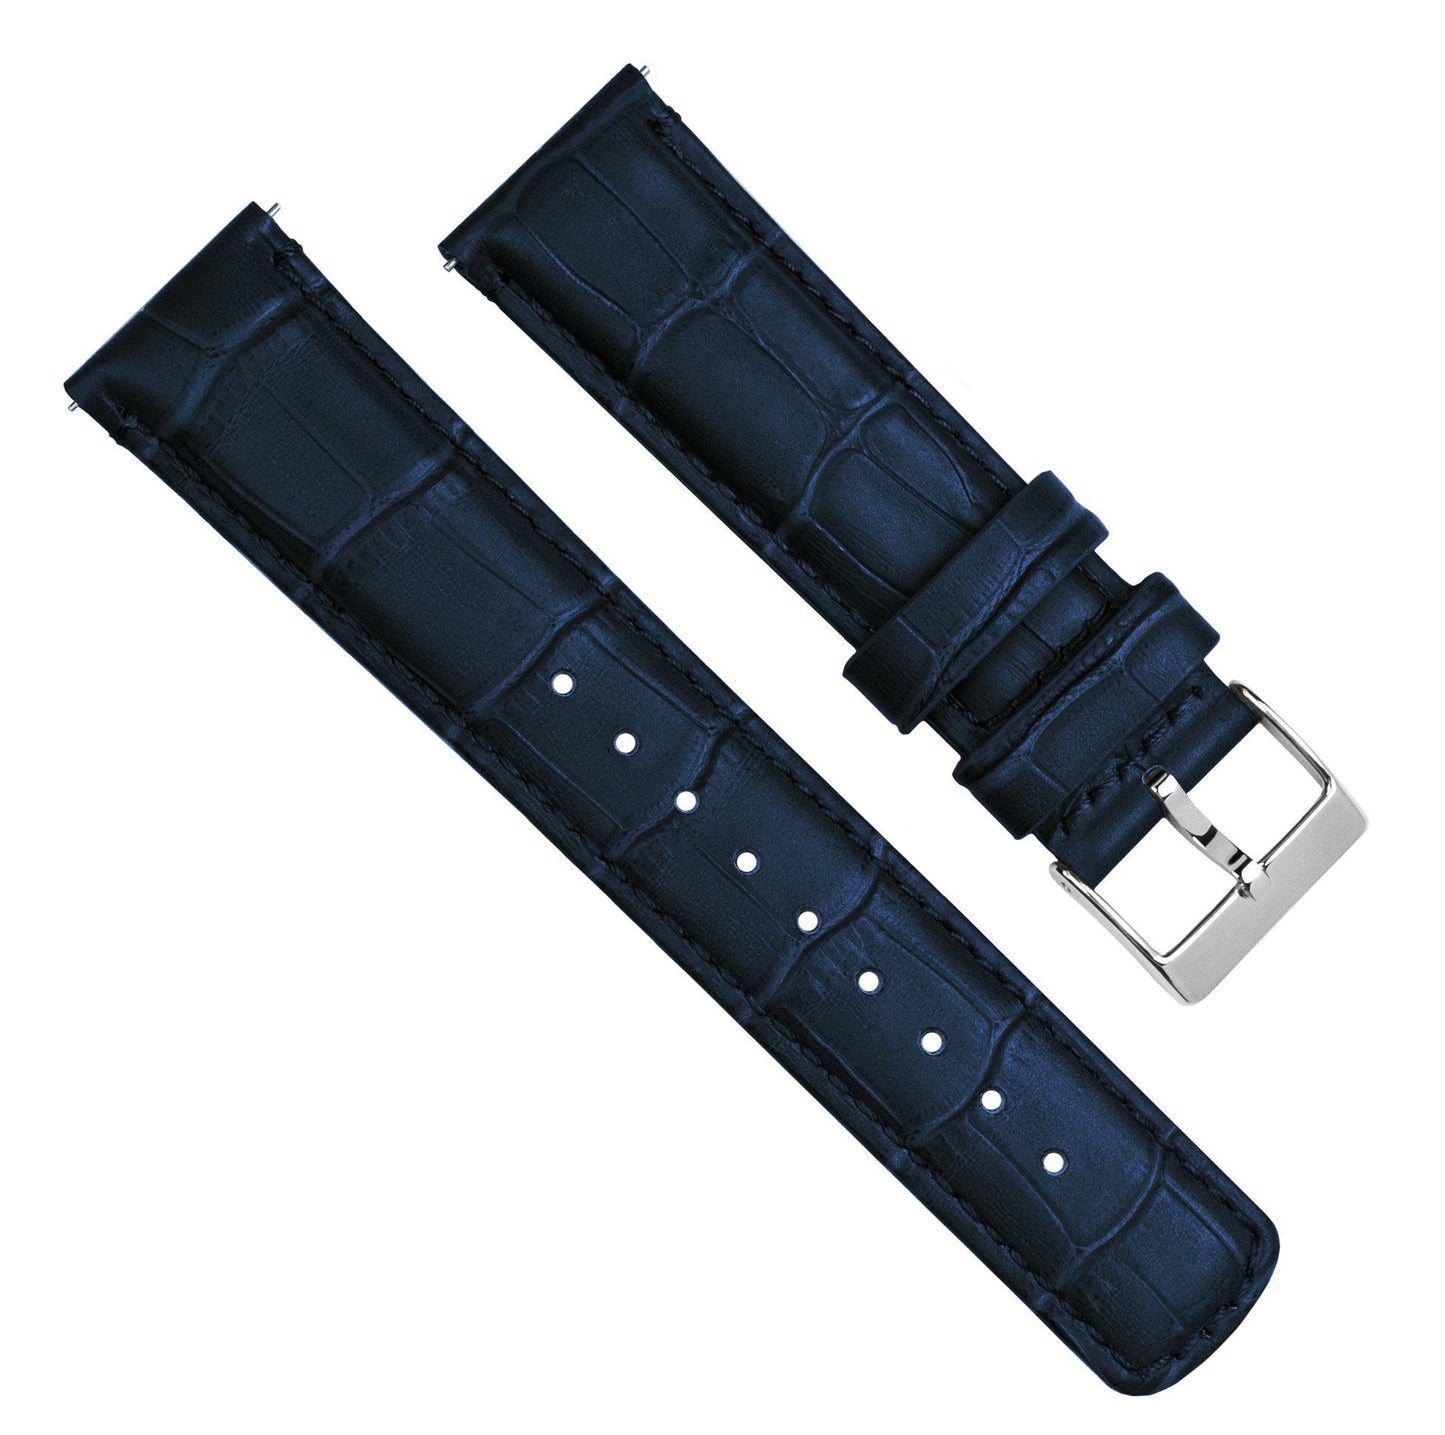 Withings Nokia Activité and Steel HR | Navy Blue Alligator Grain Leather - Barton Watch Bands